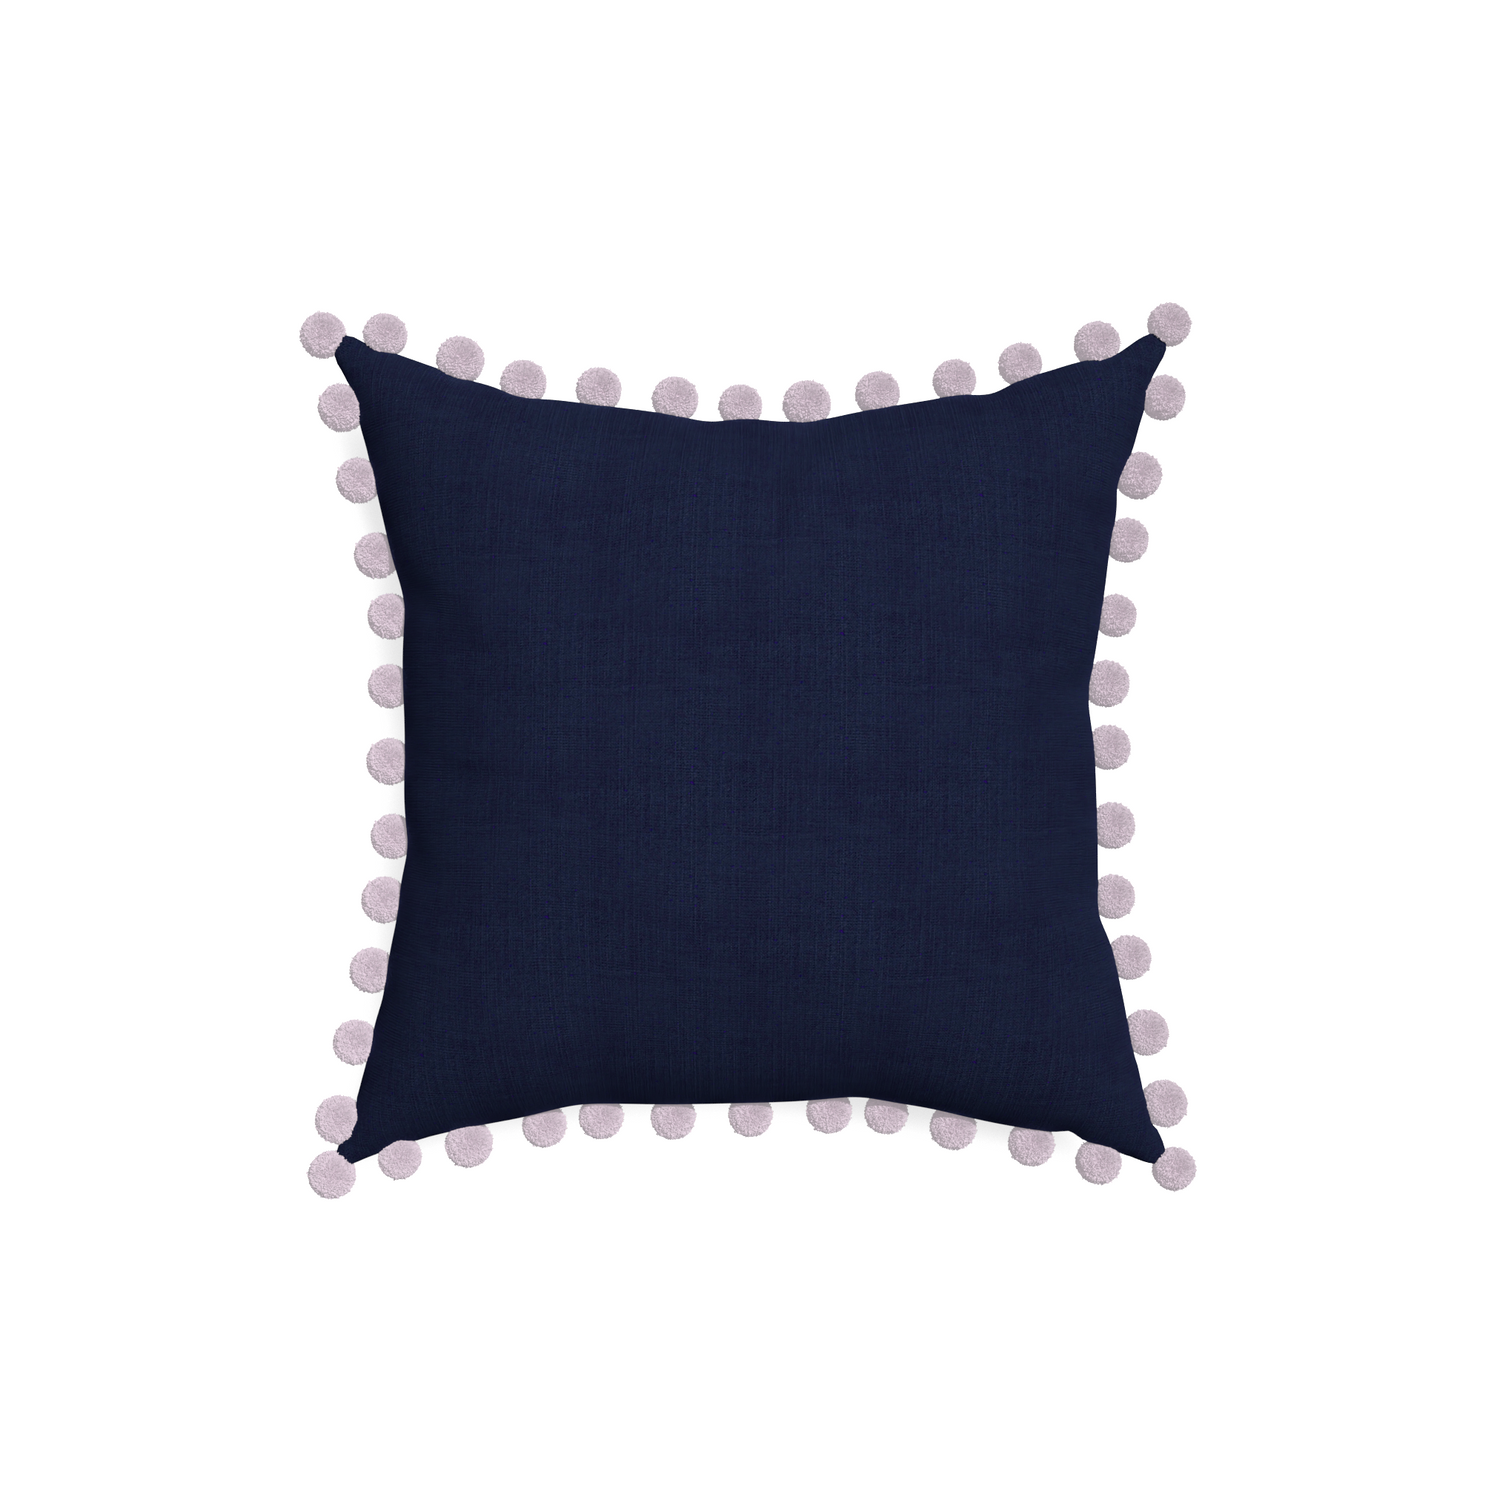 18-square midnight custom navy bluepillow with l on white background